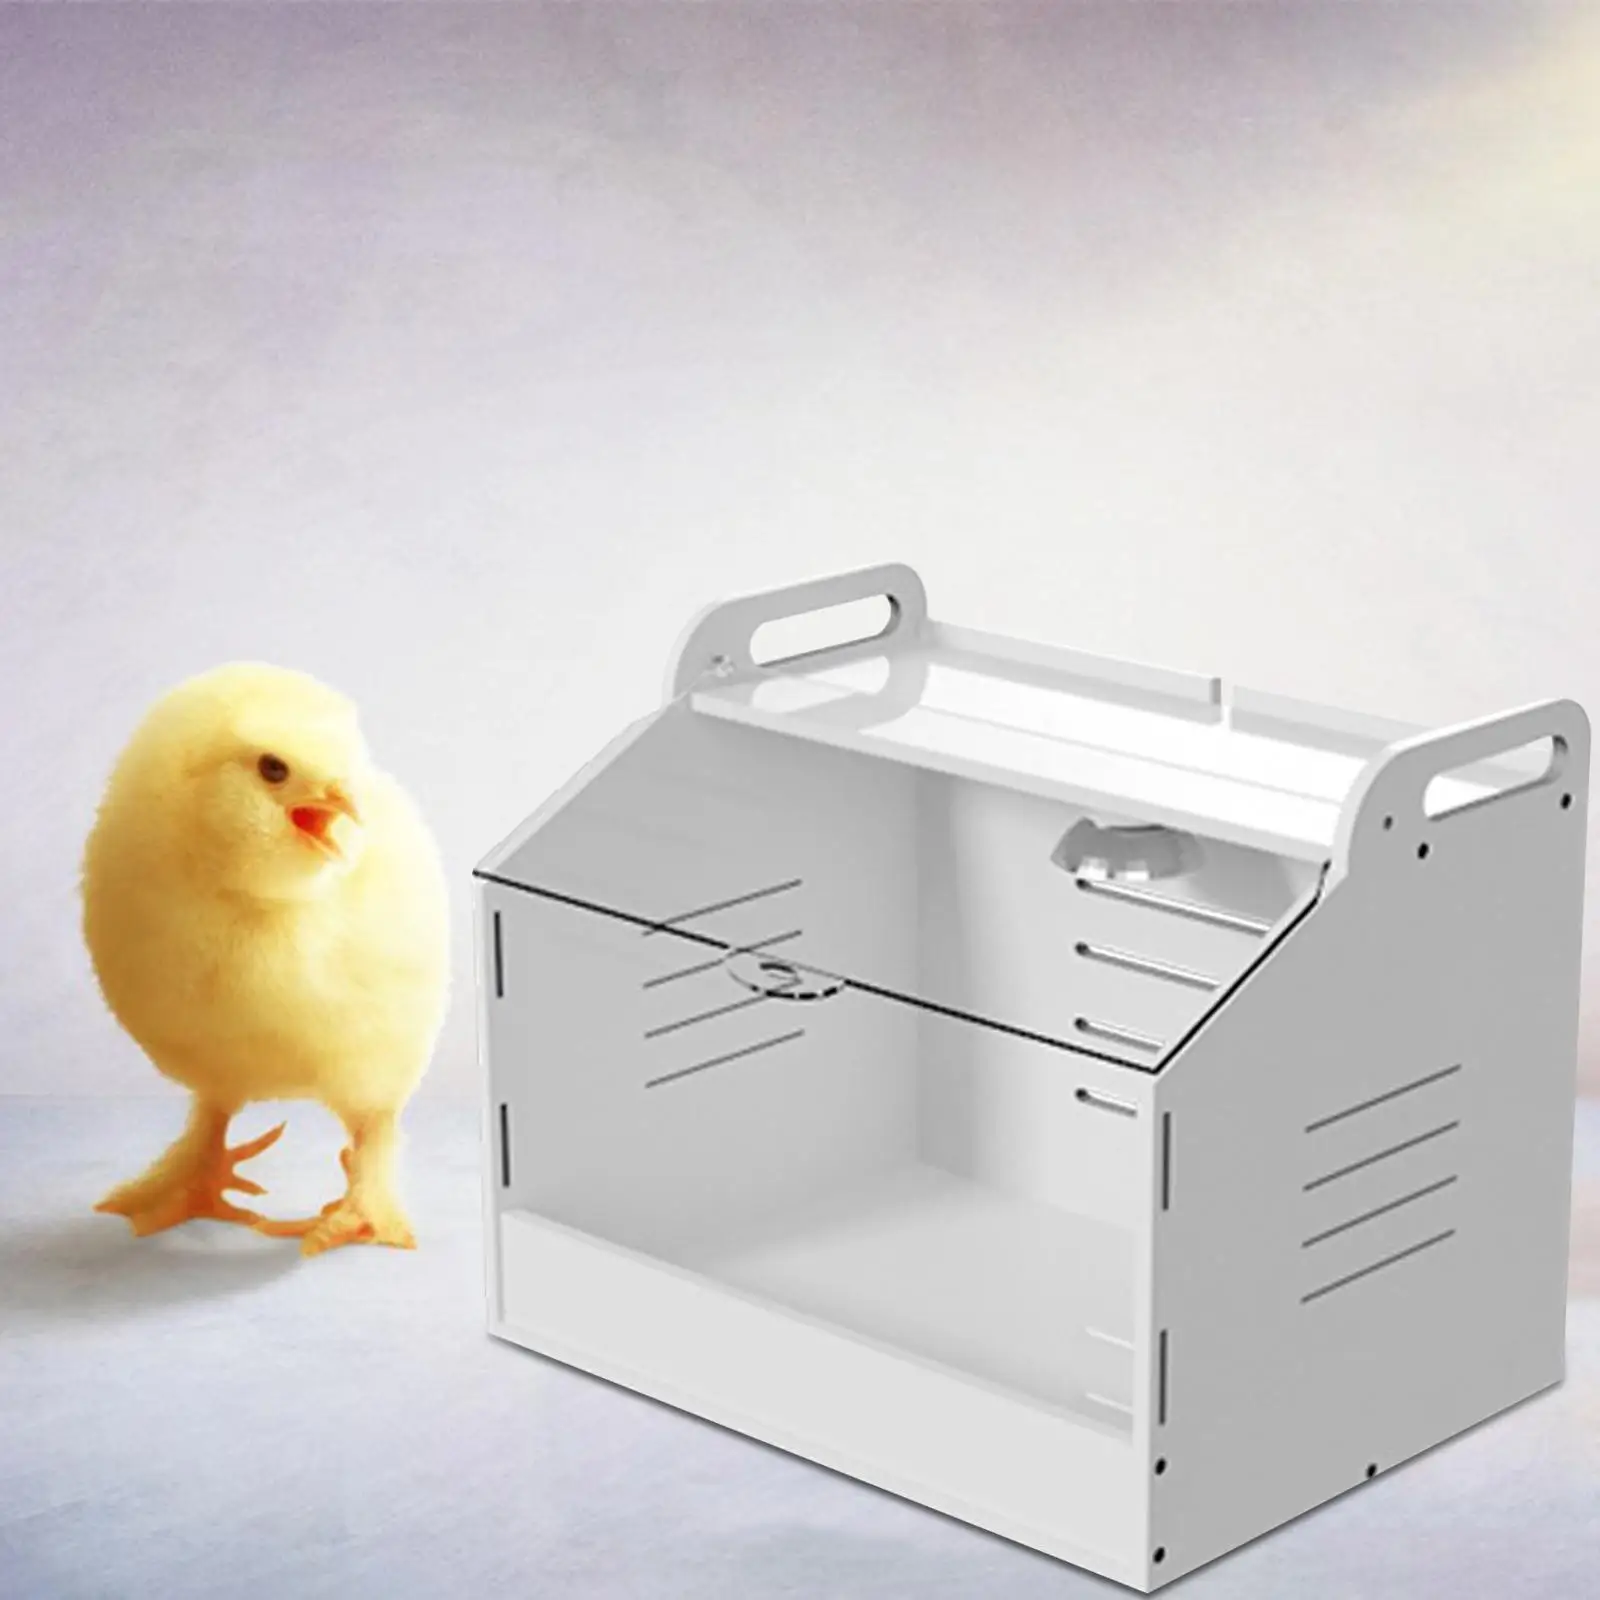 Egg Incubator Hatching DIY Assembly Farm Equipment Flame Retardant Automatic Poultry Hatcher Machine for Brooding Turkey Duck